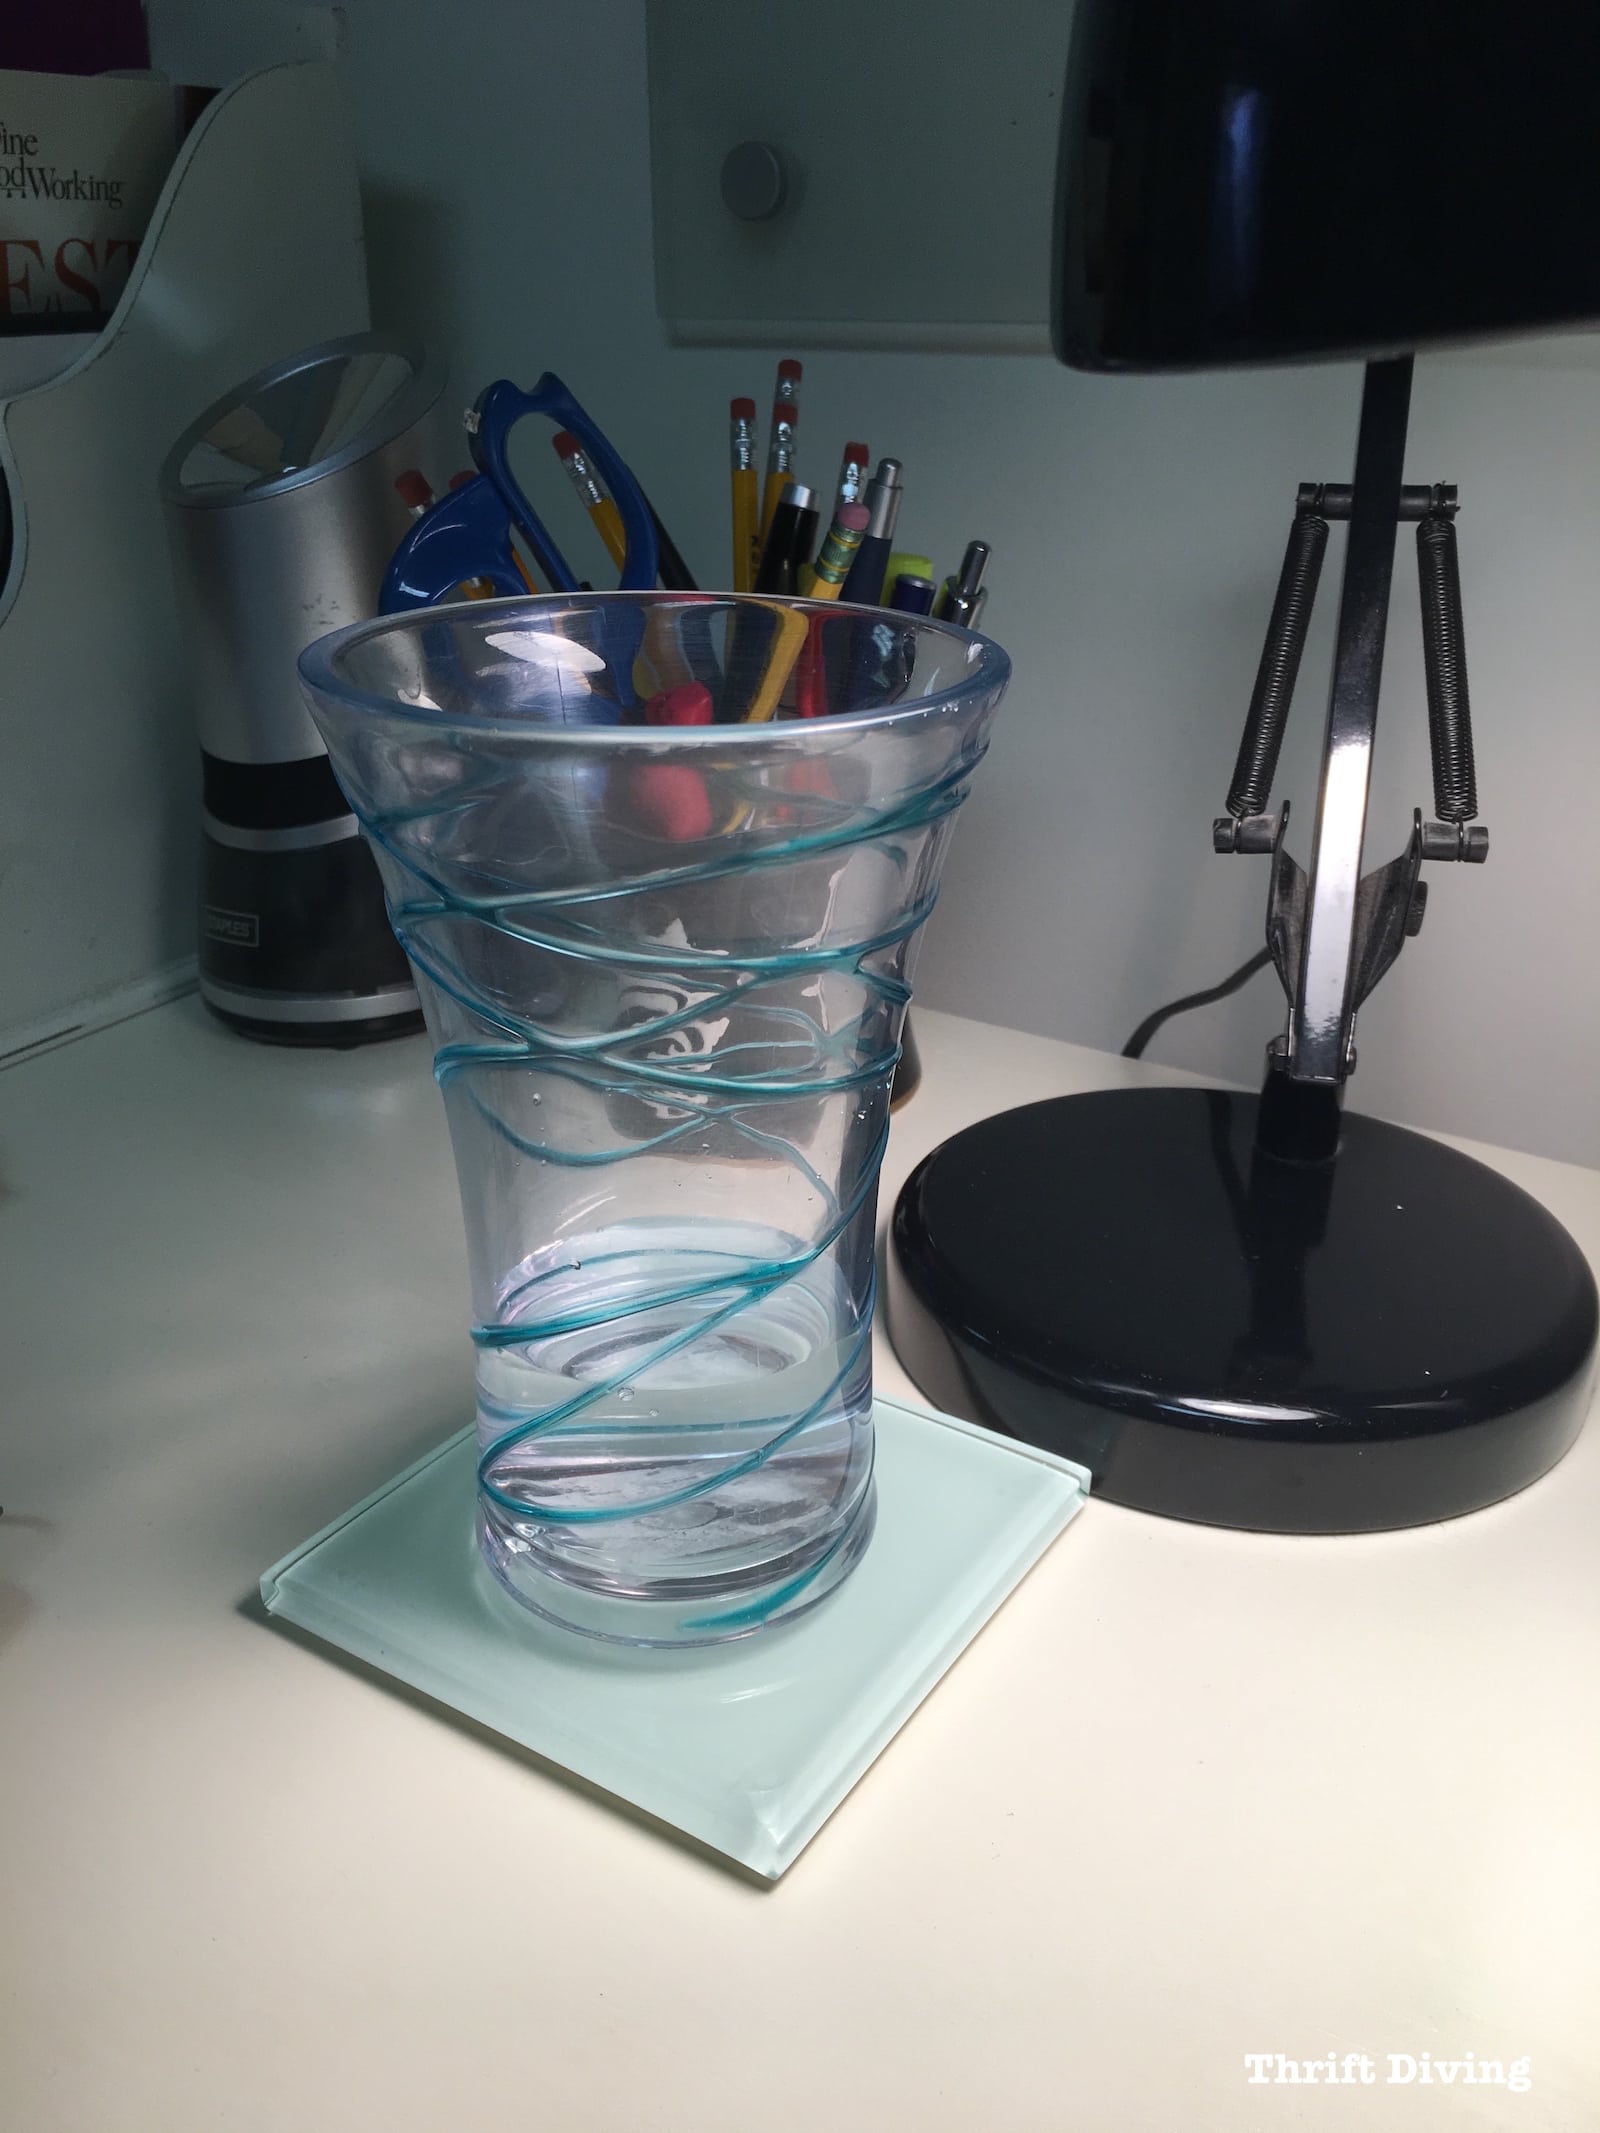 Refresh Your Desk - Use a glass tile from the hardware store as a DIY drink coaster 3